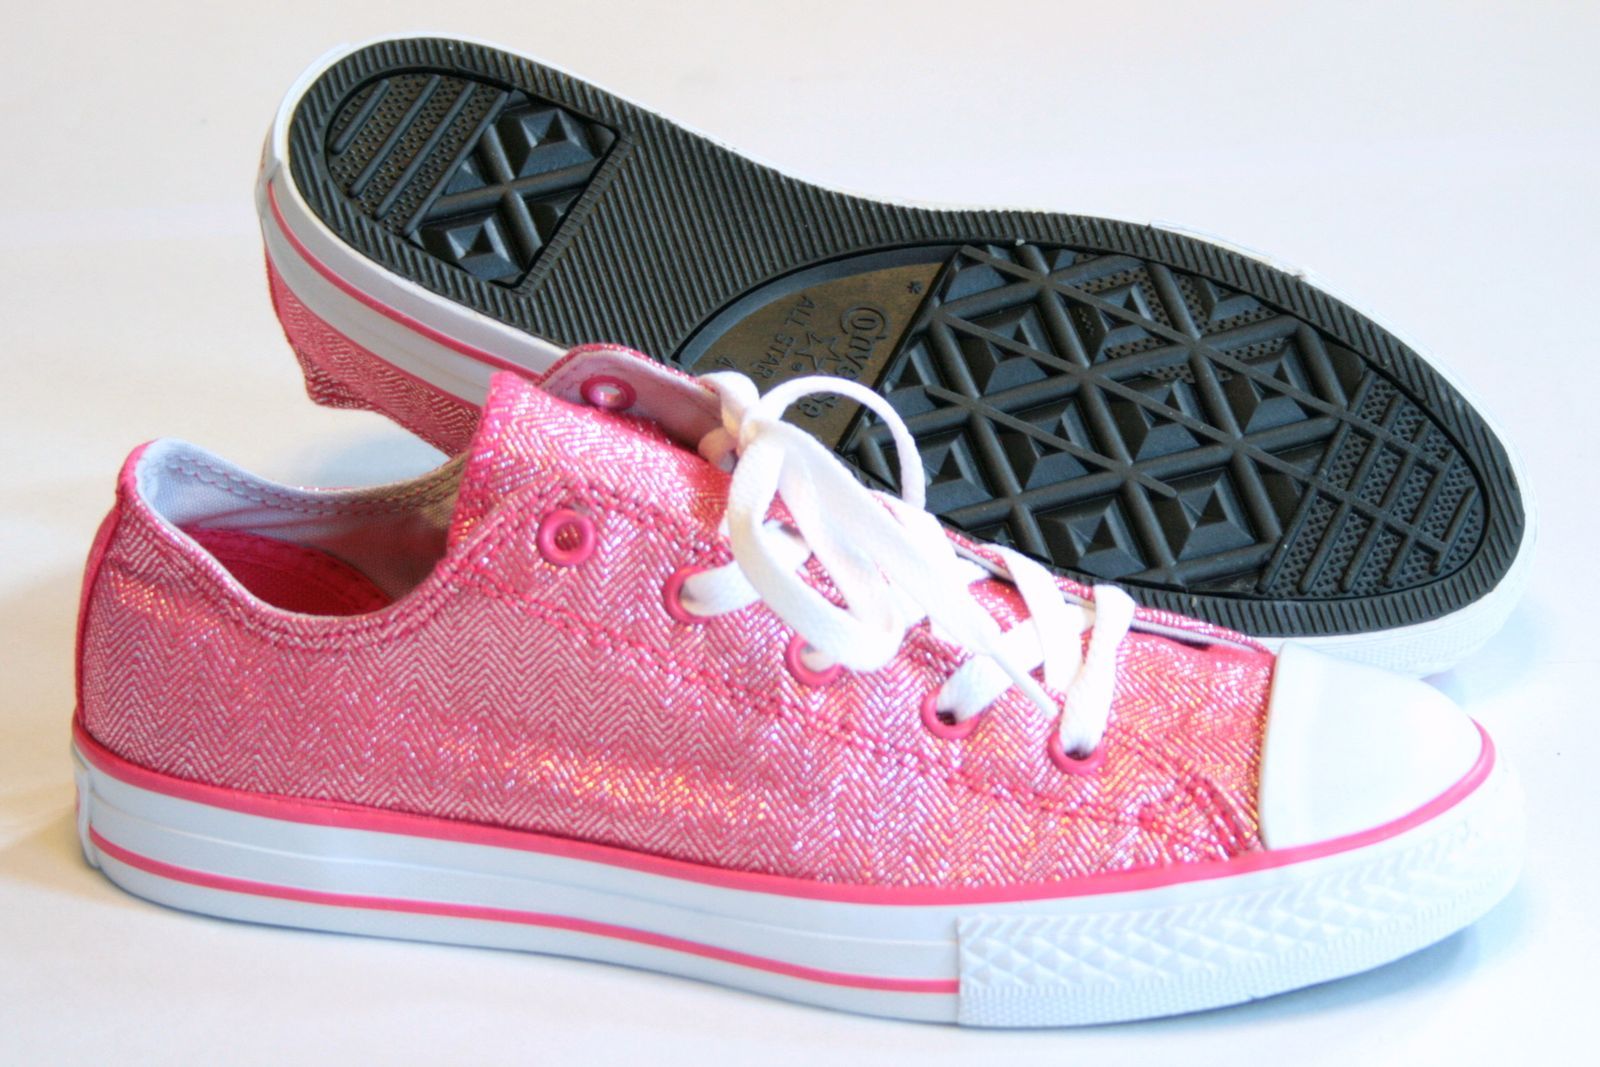 CONVERSE ALL STAR GLITTER SPARKLE PINK JUNIOR WOMEN'S ATHLETIC SNEAKERS #4